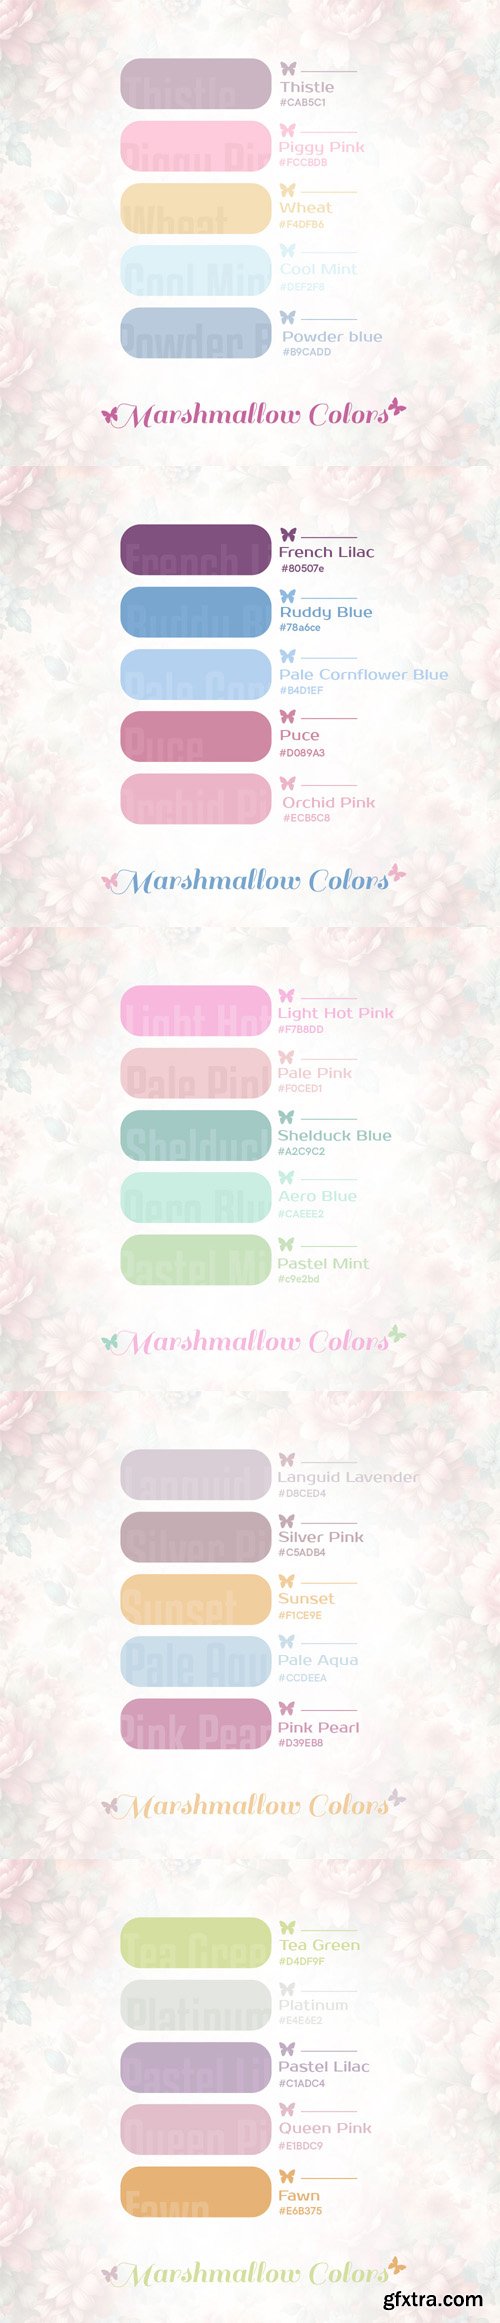 Marshmallow Color Swatches for Photoshop